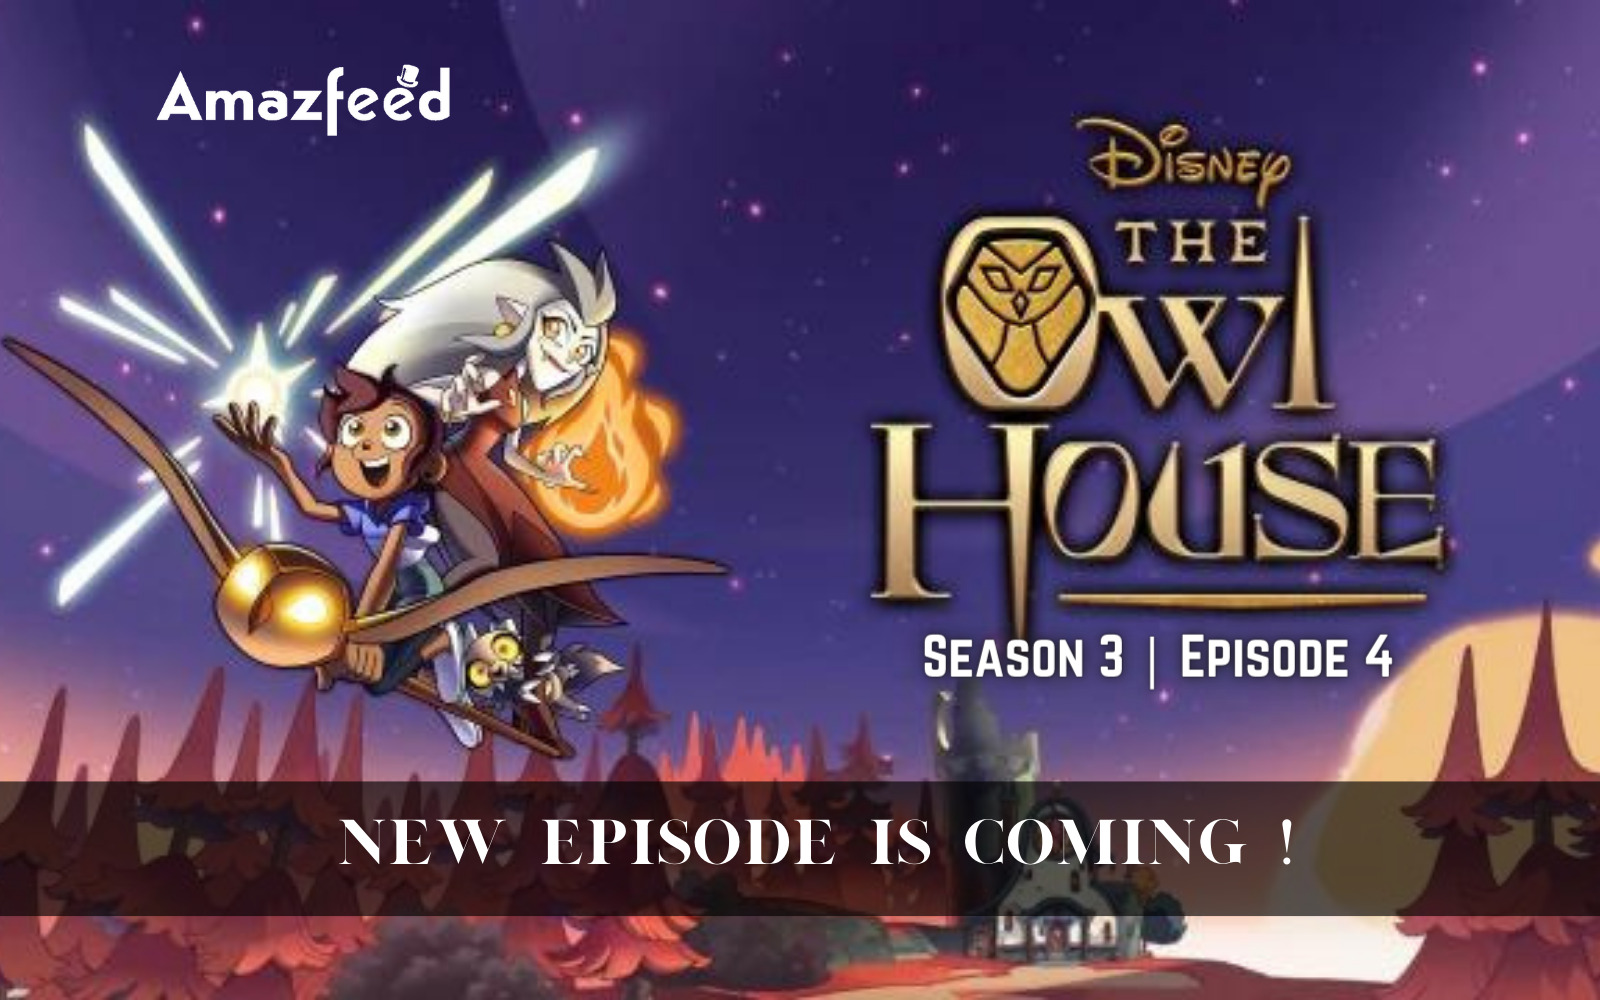 The Owl House Season 3 Episode 4 ⇒ Countdown, Release Date, Spoilers